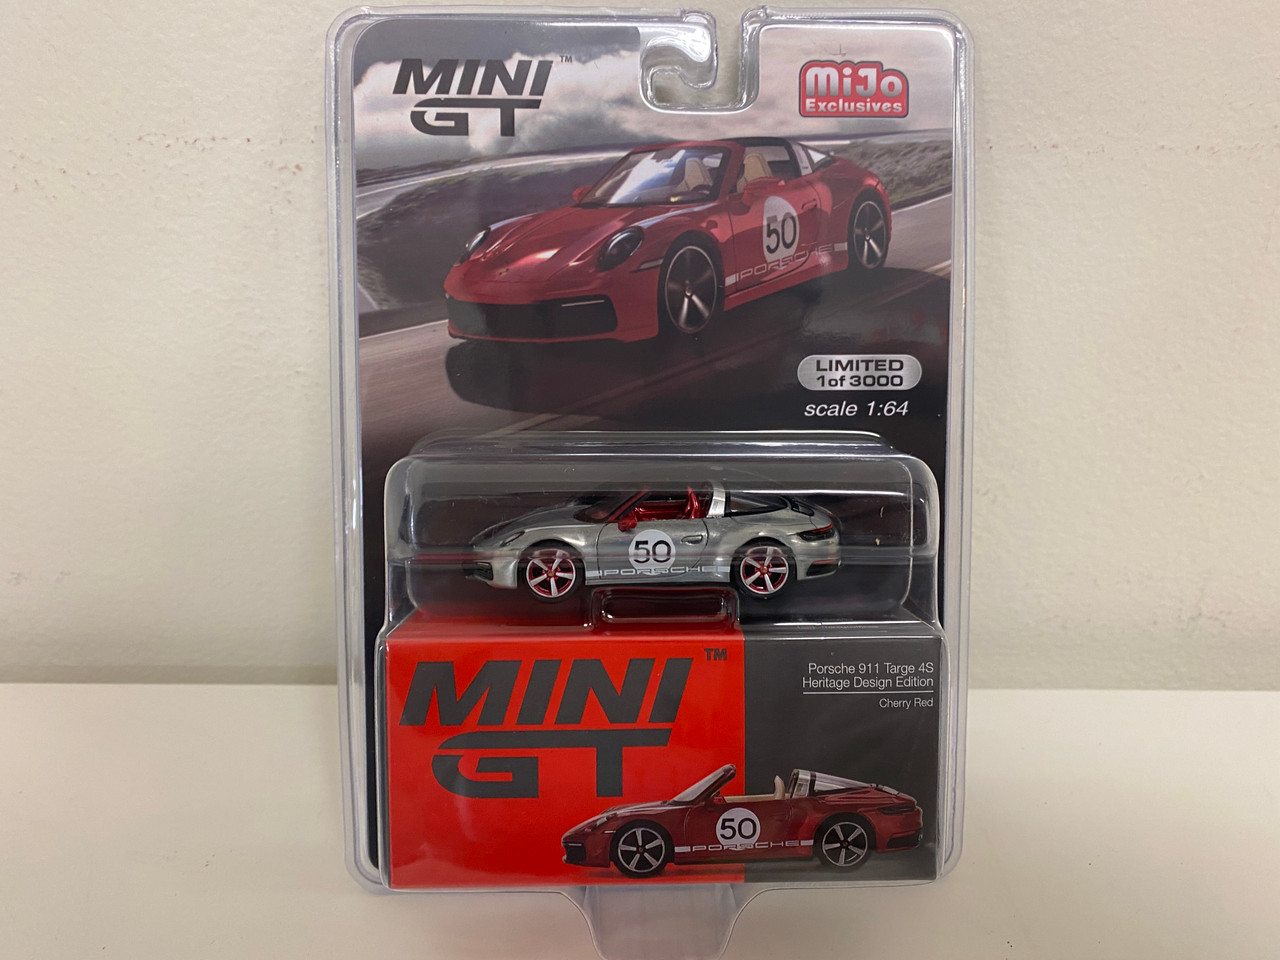 Buy Latest MINI GT Diecast Cars Online In India - MINIATURE TOY SHOP